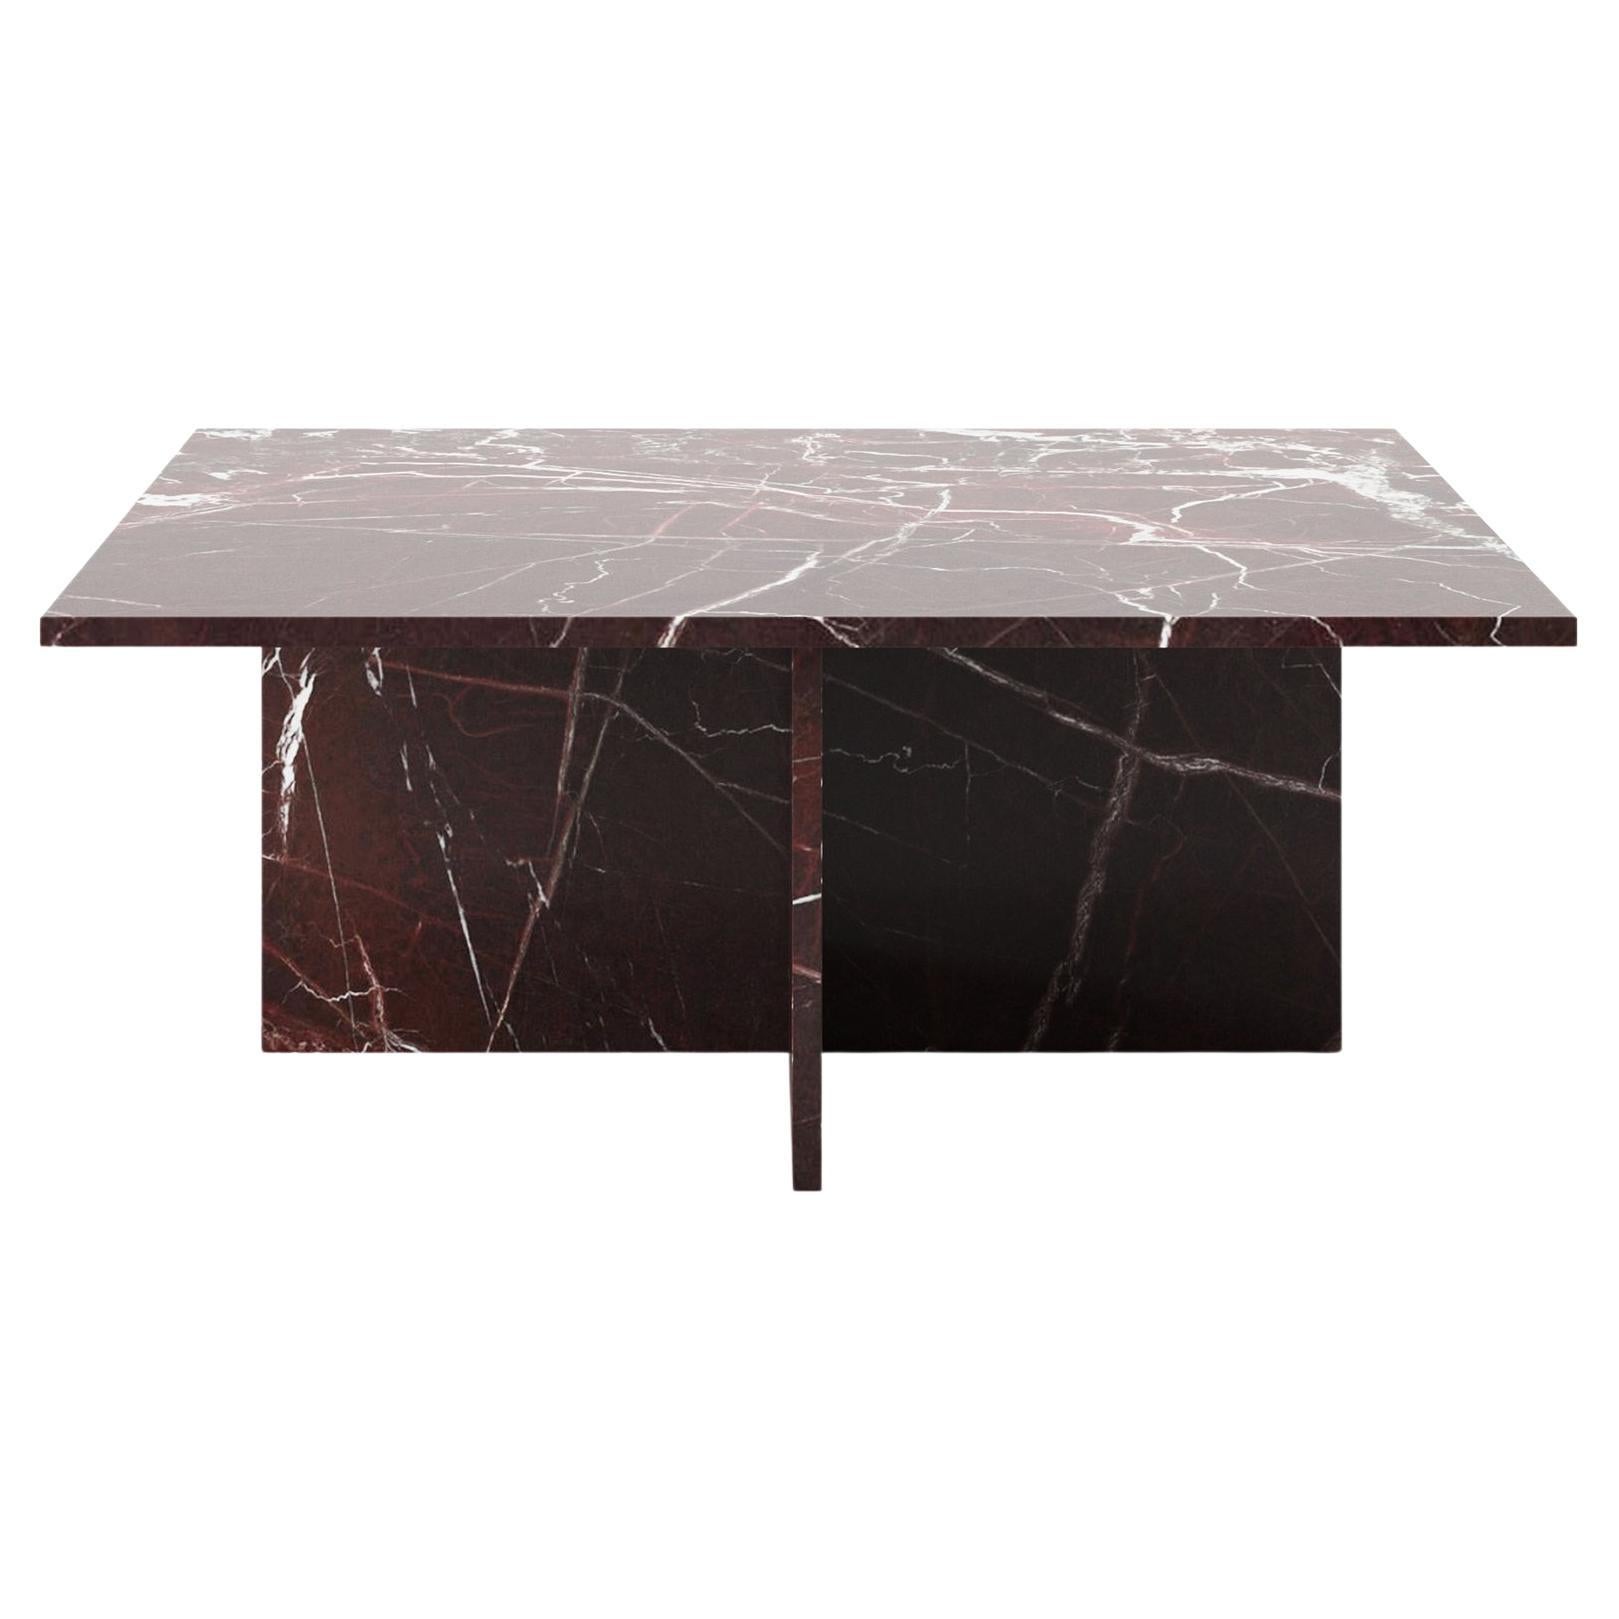 Vondel Square Table Handcrafted in Polished Rosso Levanto Marble